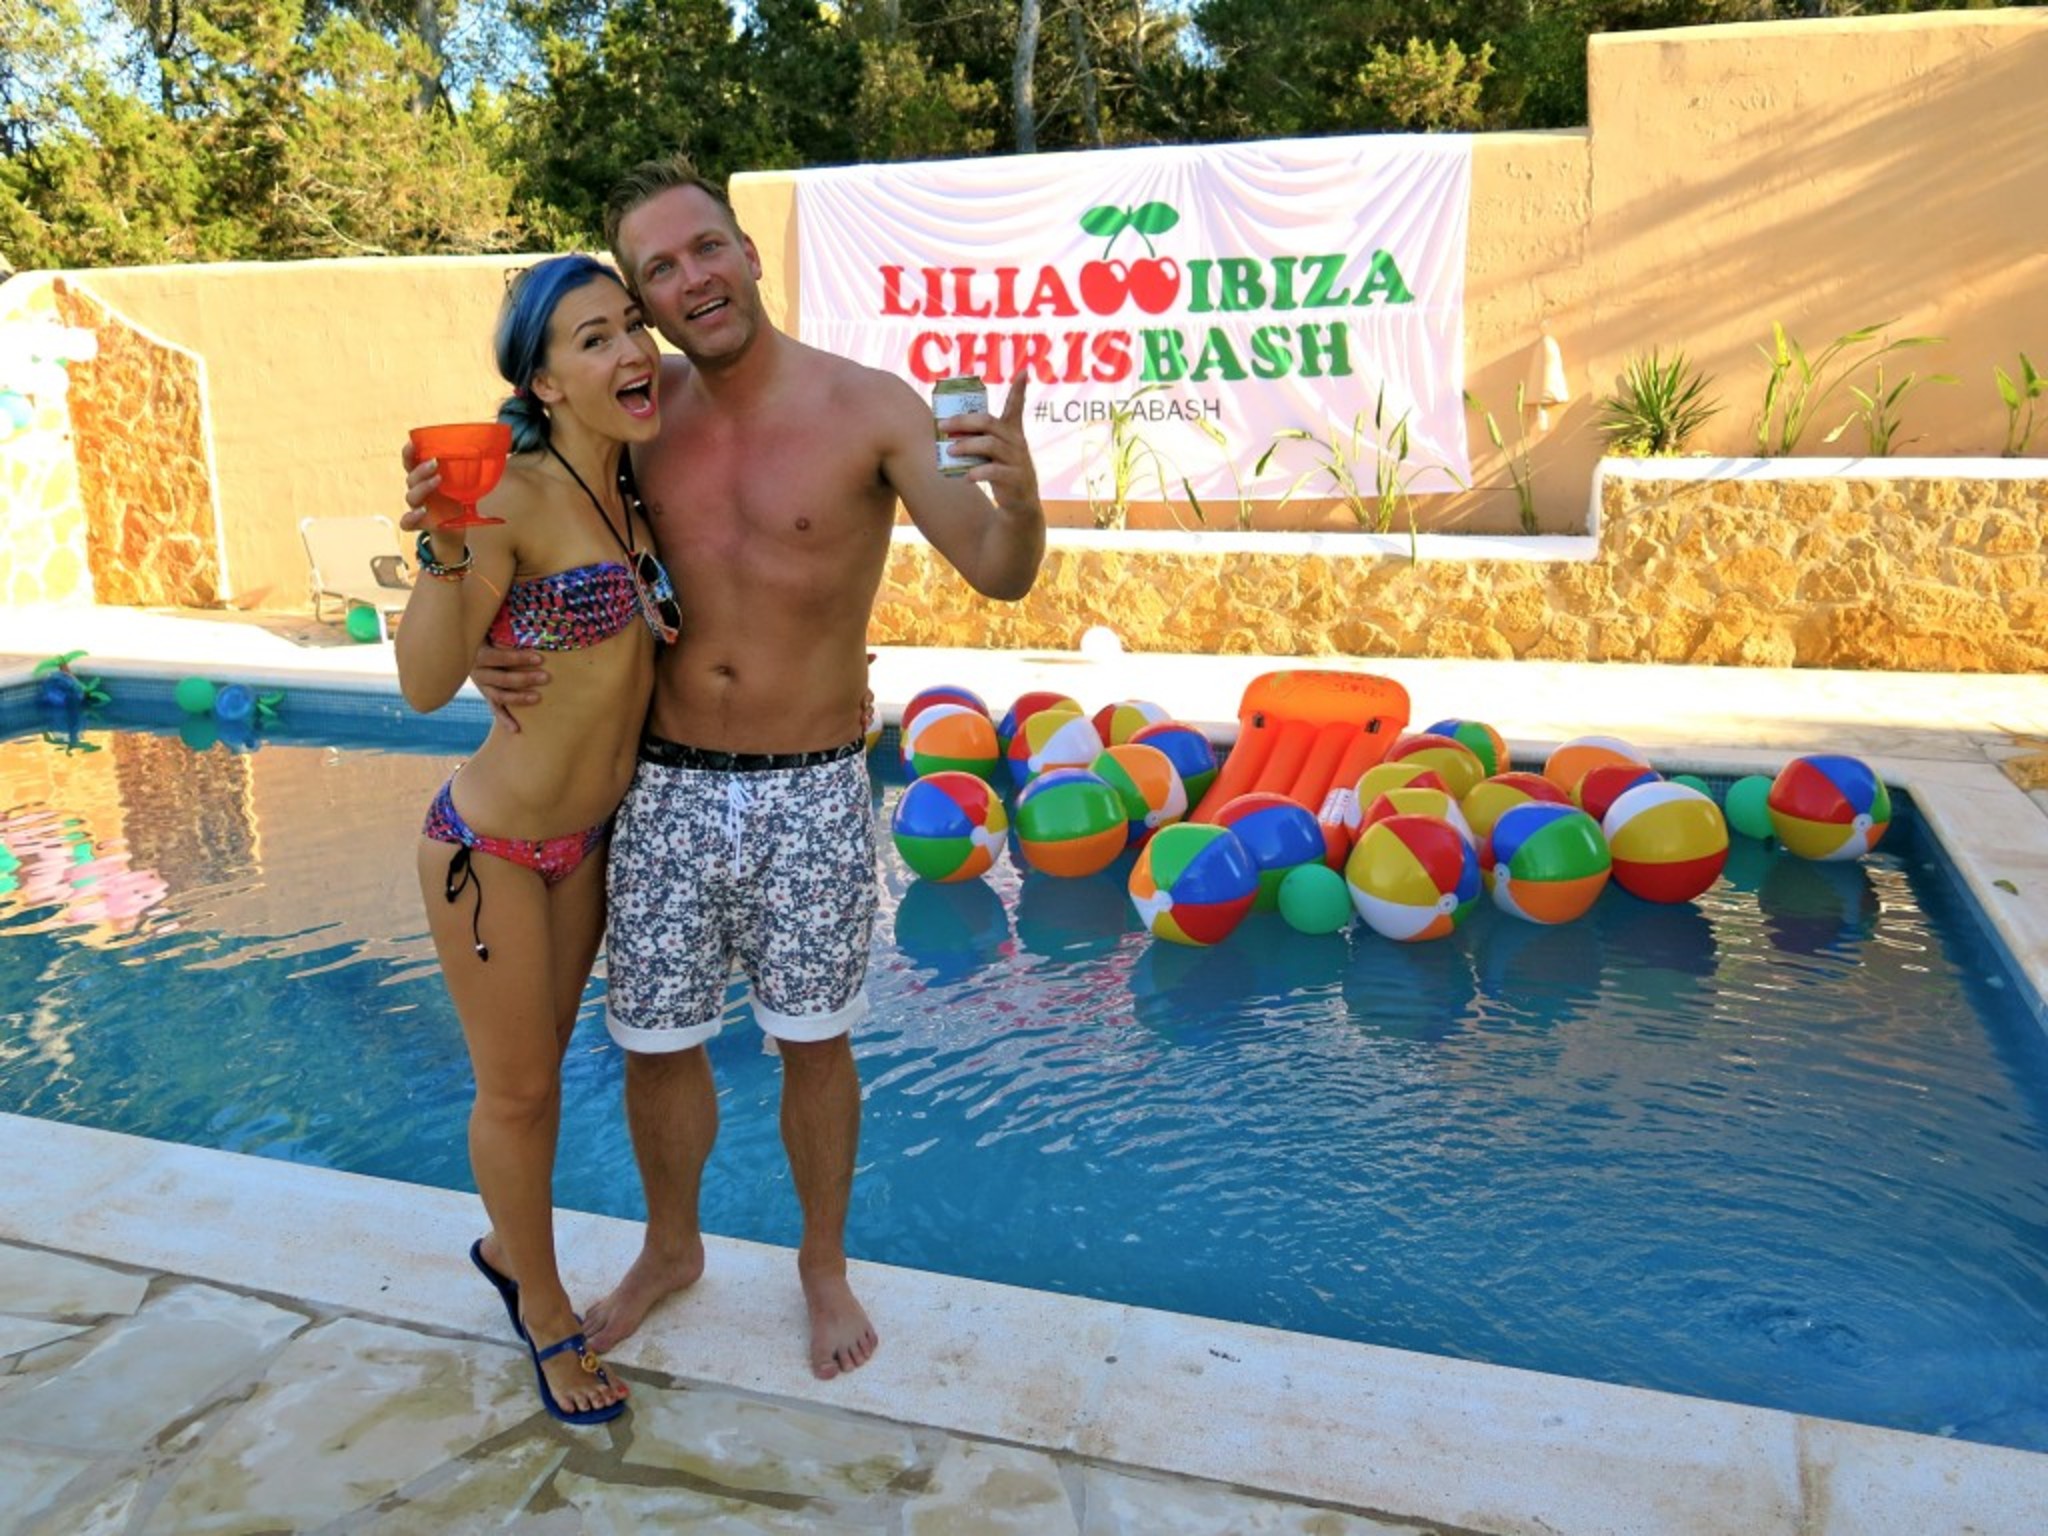 Happy Bday 2 us!!!!  Well, here are some updates from our BBQ Party at our Torre Pirata Villa! Cheers!